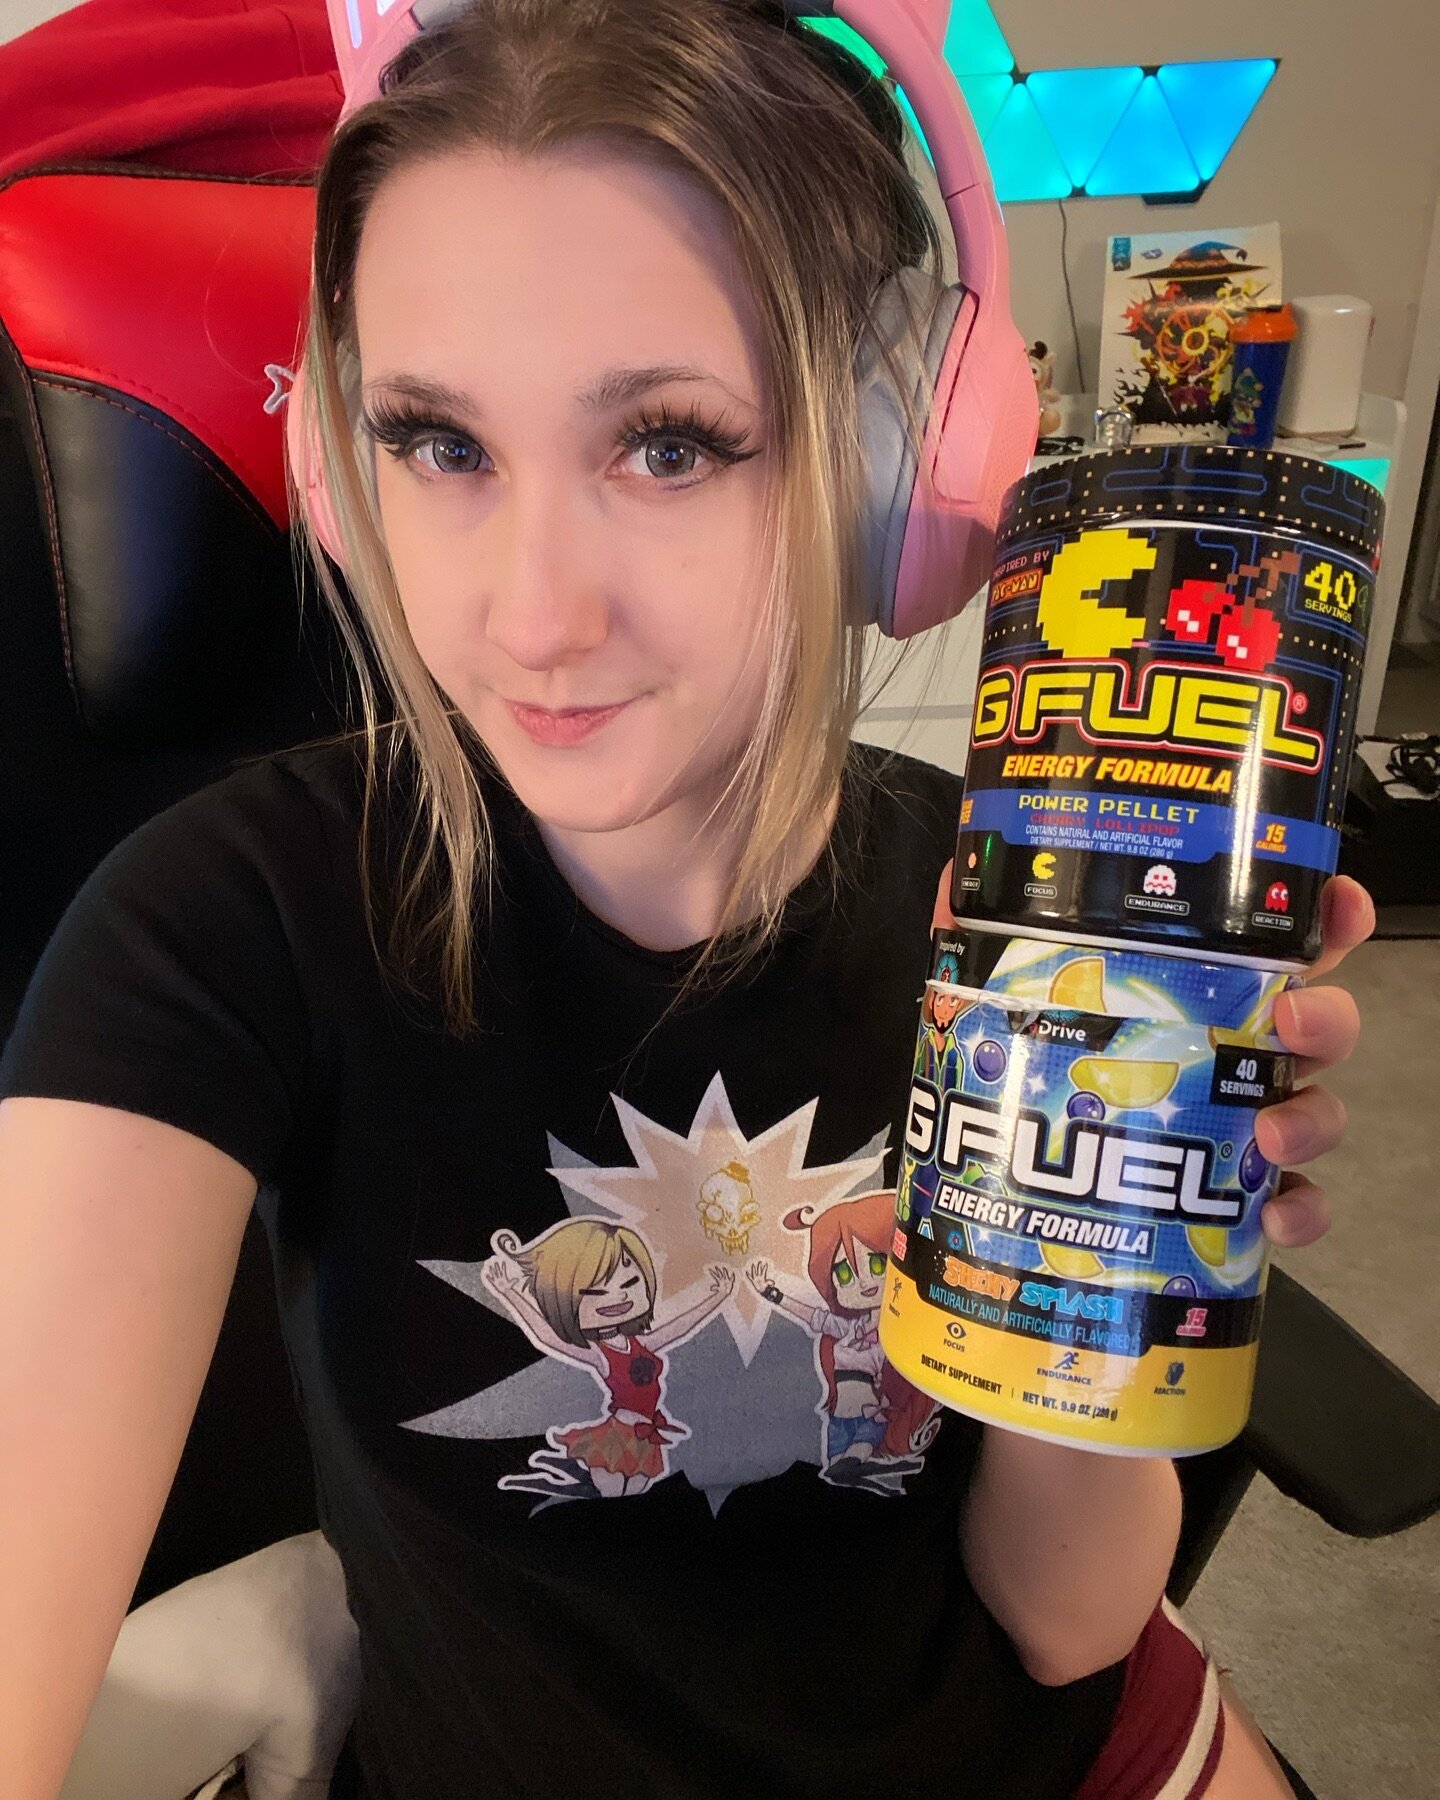 Gfuel flavor of the week has been Shiny Splash and Power Pellet! 
Got a lot of con crunching for PAX East so will be needing all the GFUEL!

Don&rsquo;t forget to use my code MANGOLOO at @gfuelenergy 

Who will I see at PAX?!

#gfuel #gfuelenergy #gf